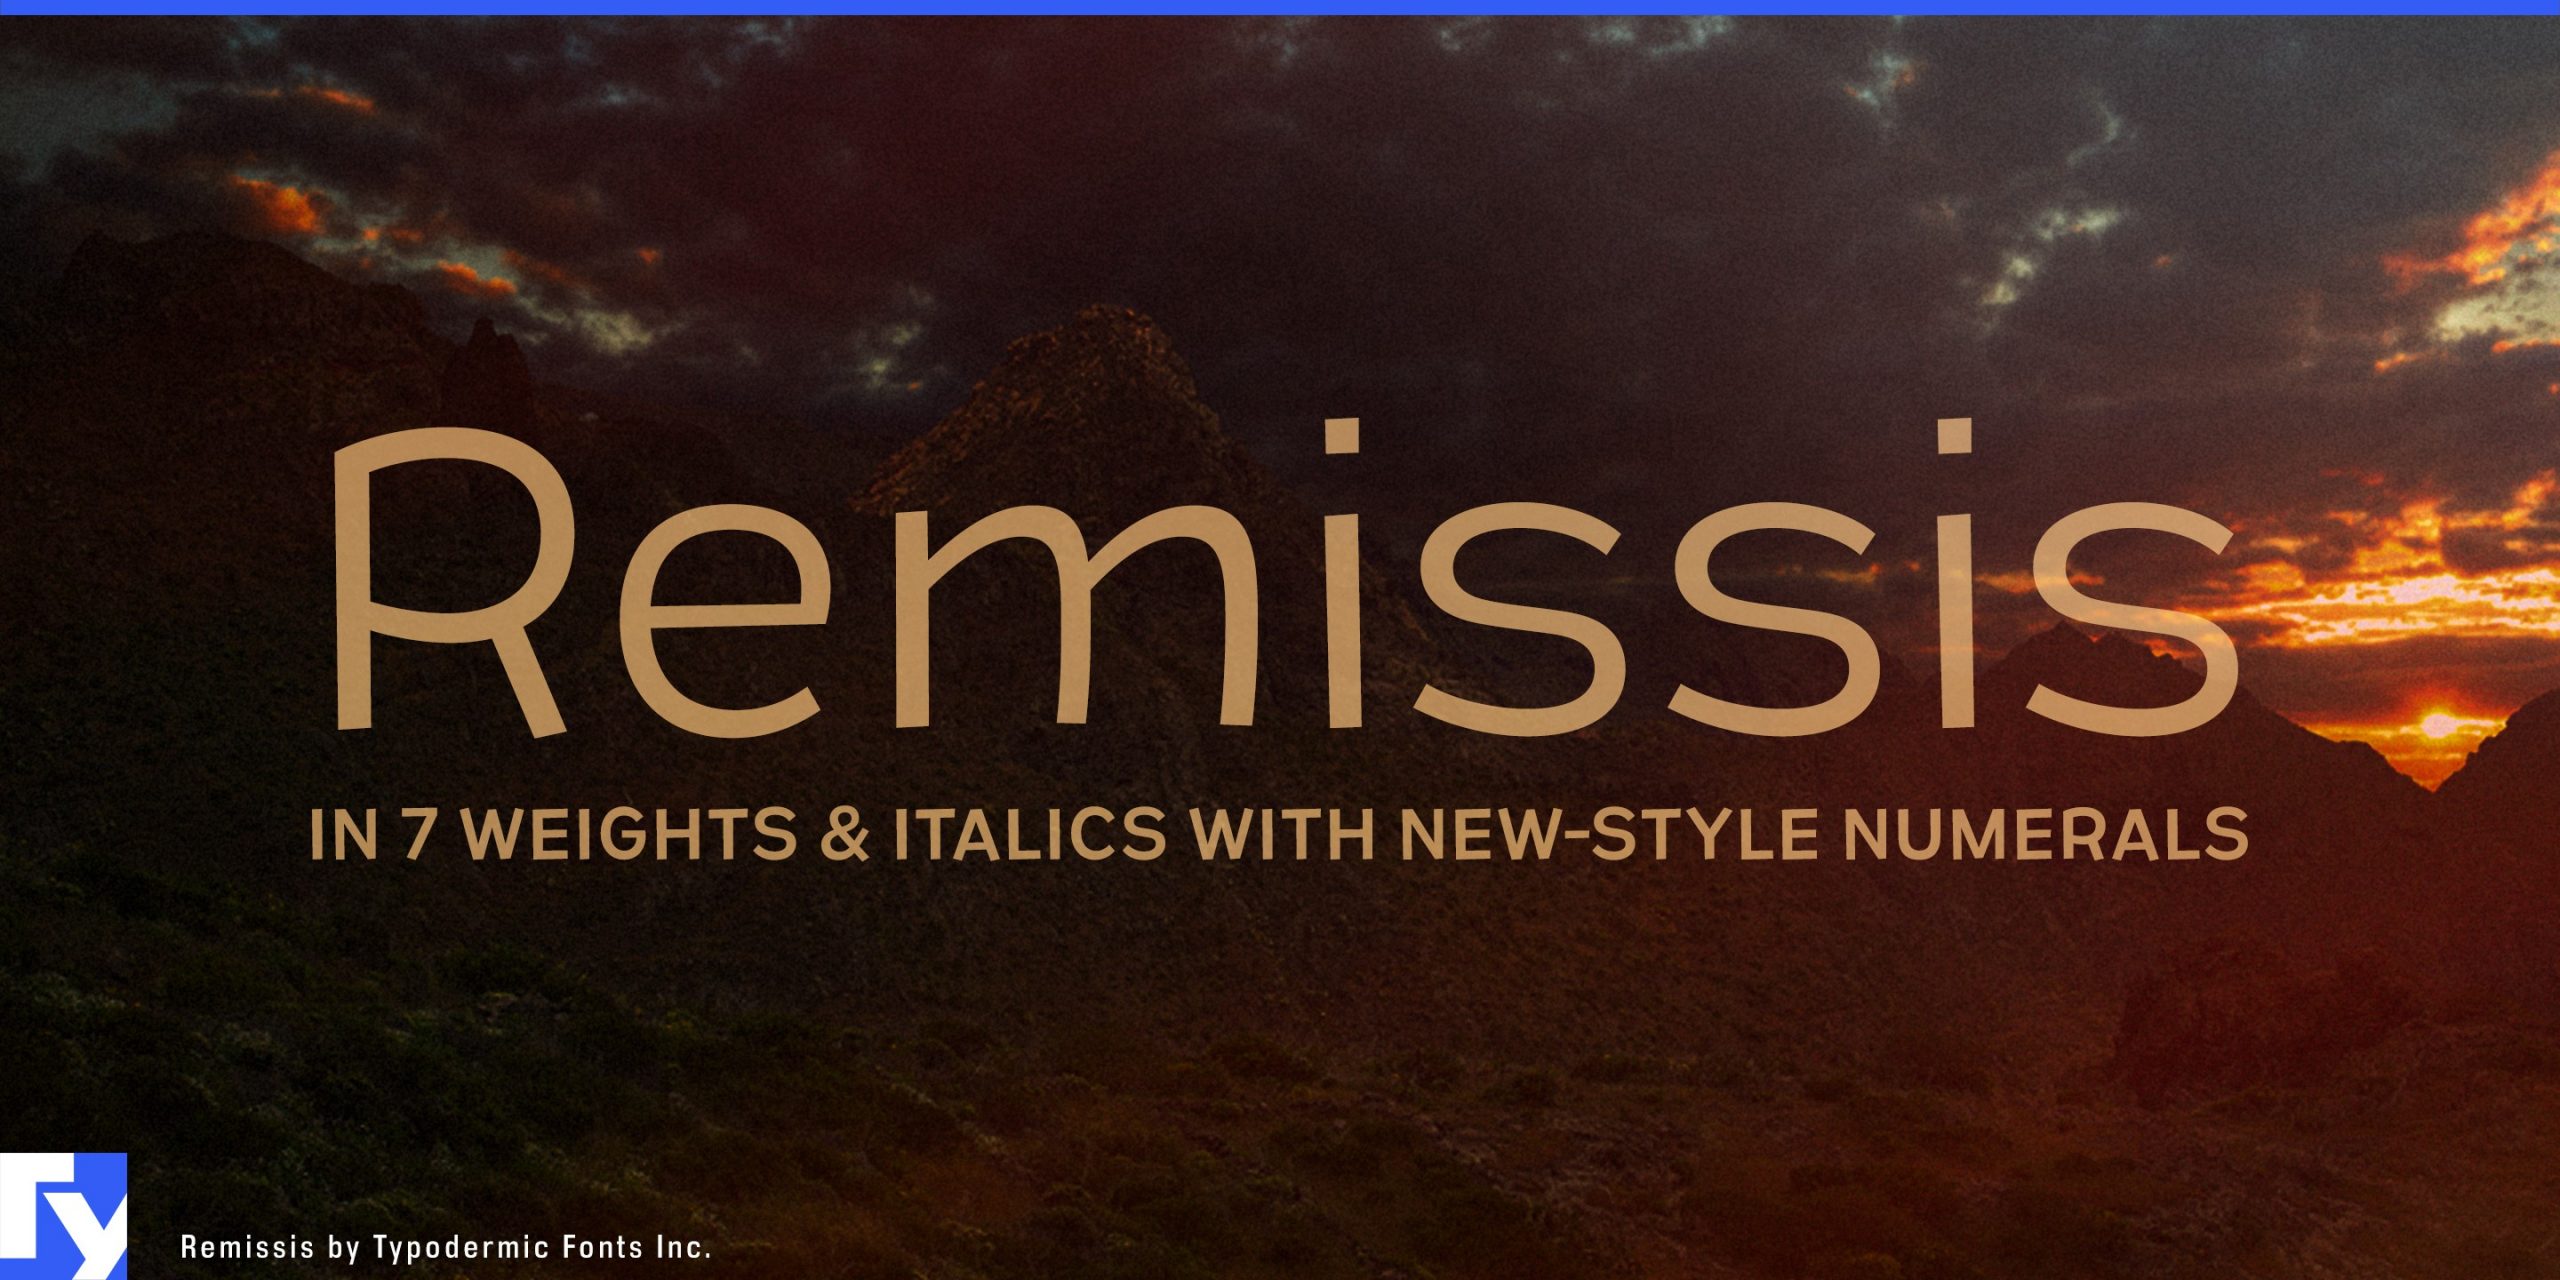 Softness meets sophistication: Remissis typeface strikes the right balance